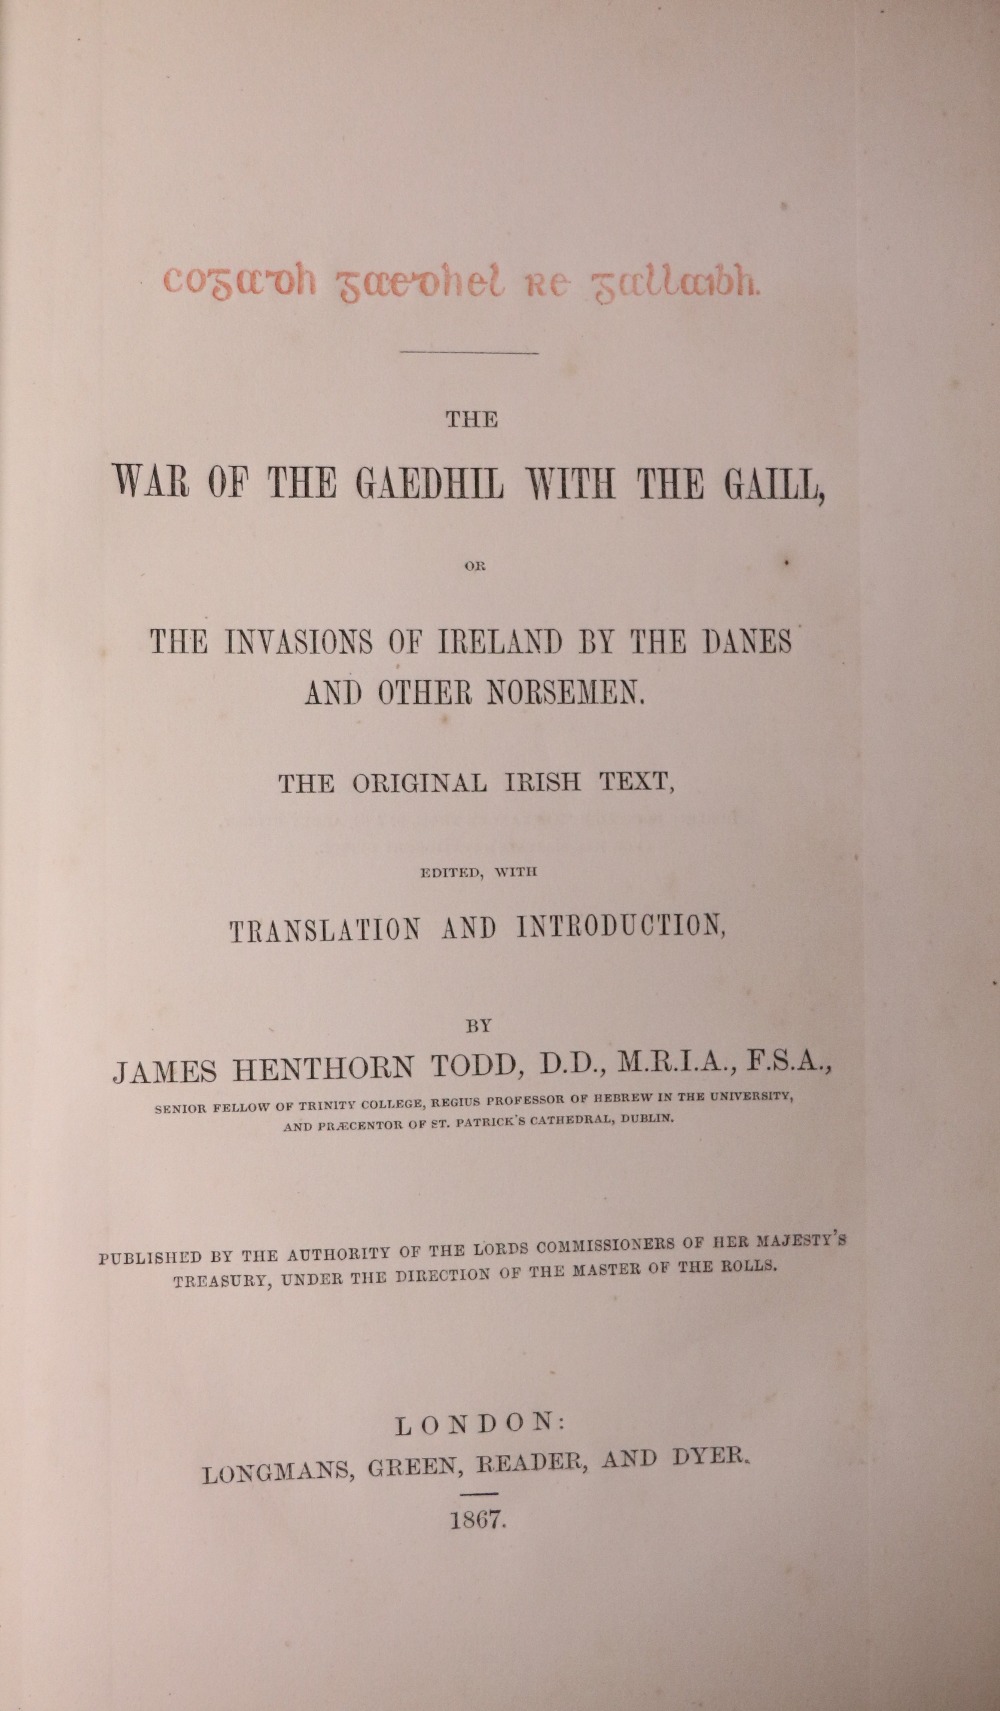 Todd (James Henthorn) The War of the Gaedhil with the Gaill, roy 8vo L. 1867. First Edn., 2 cold.